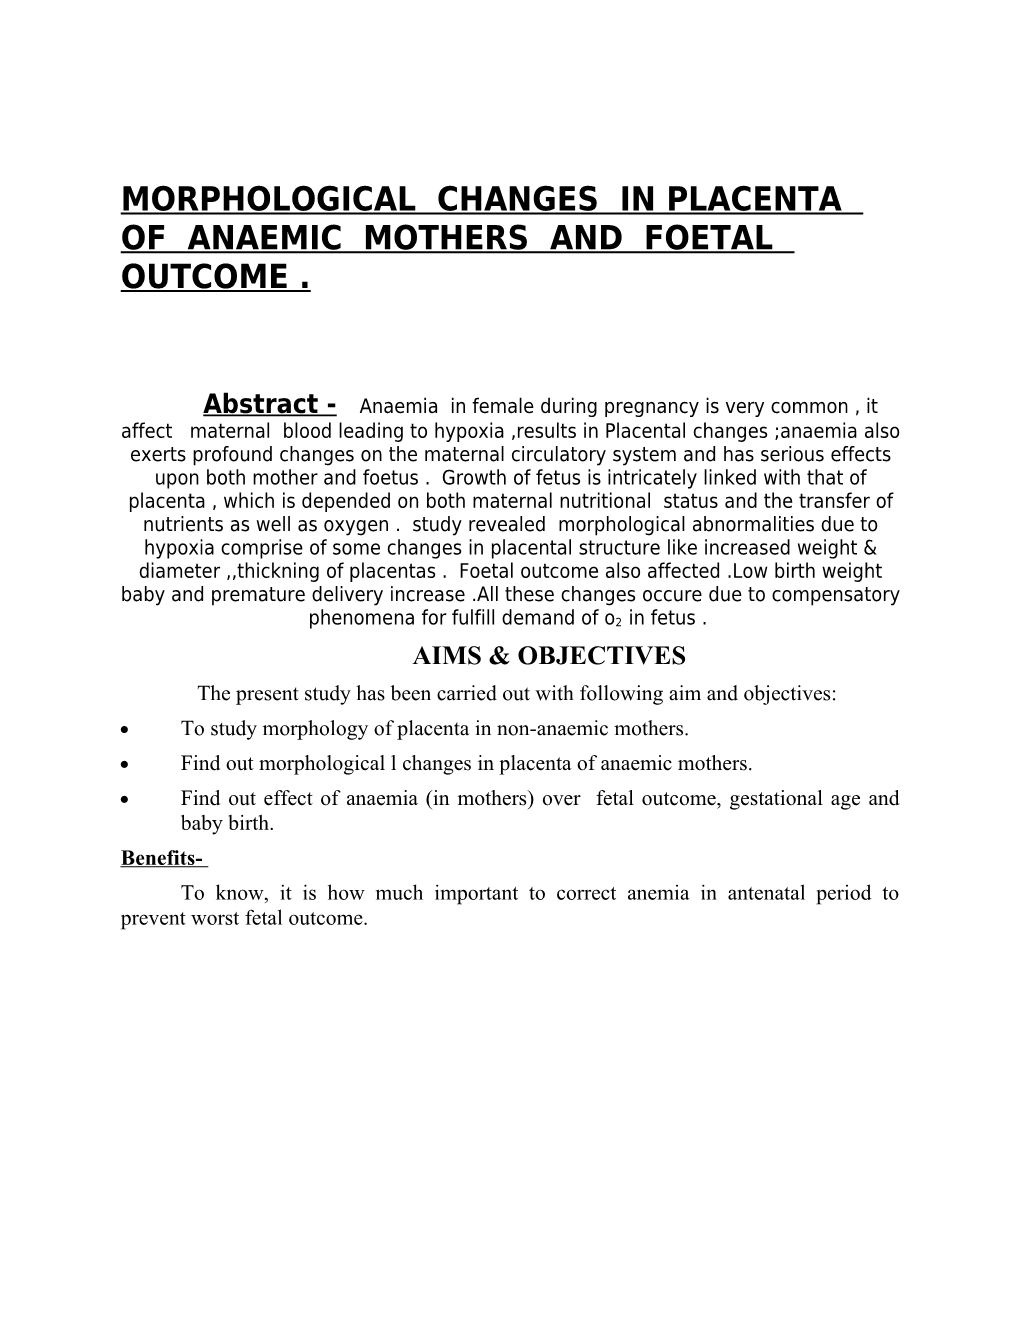 Morphological Changes in Placenta of Anaemic Mothers and Foetal Outcome